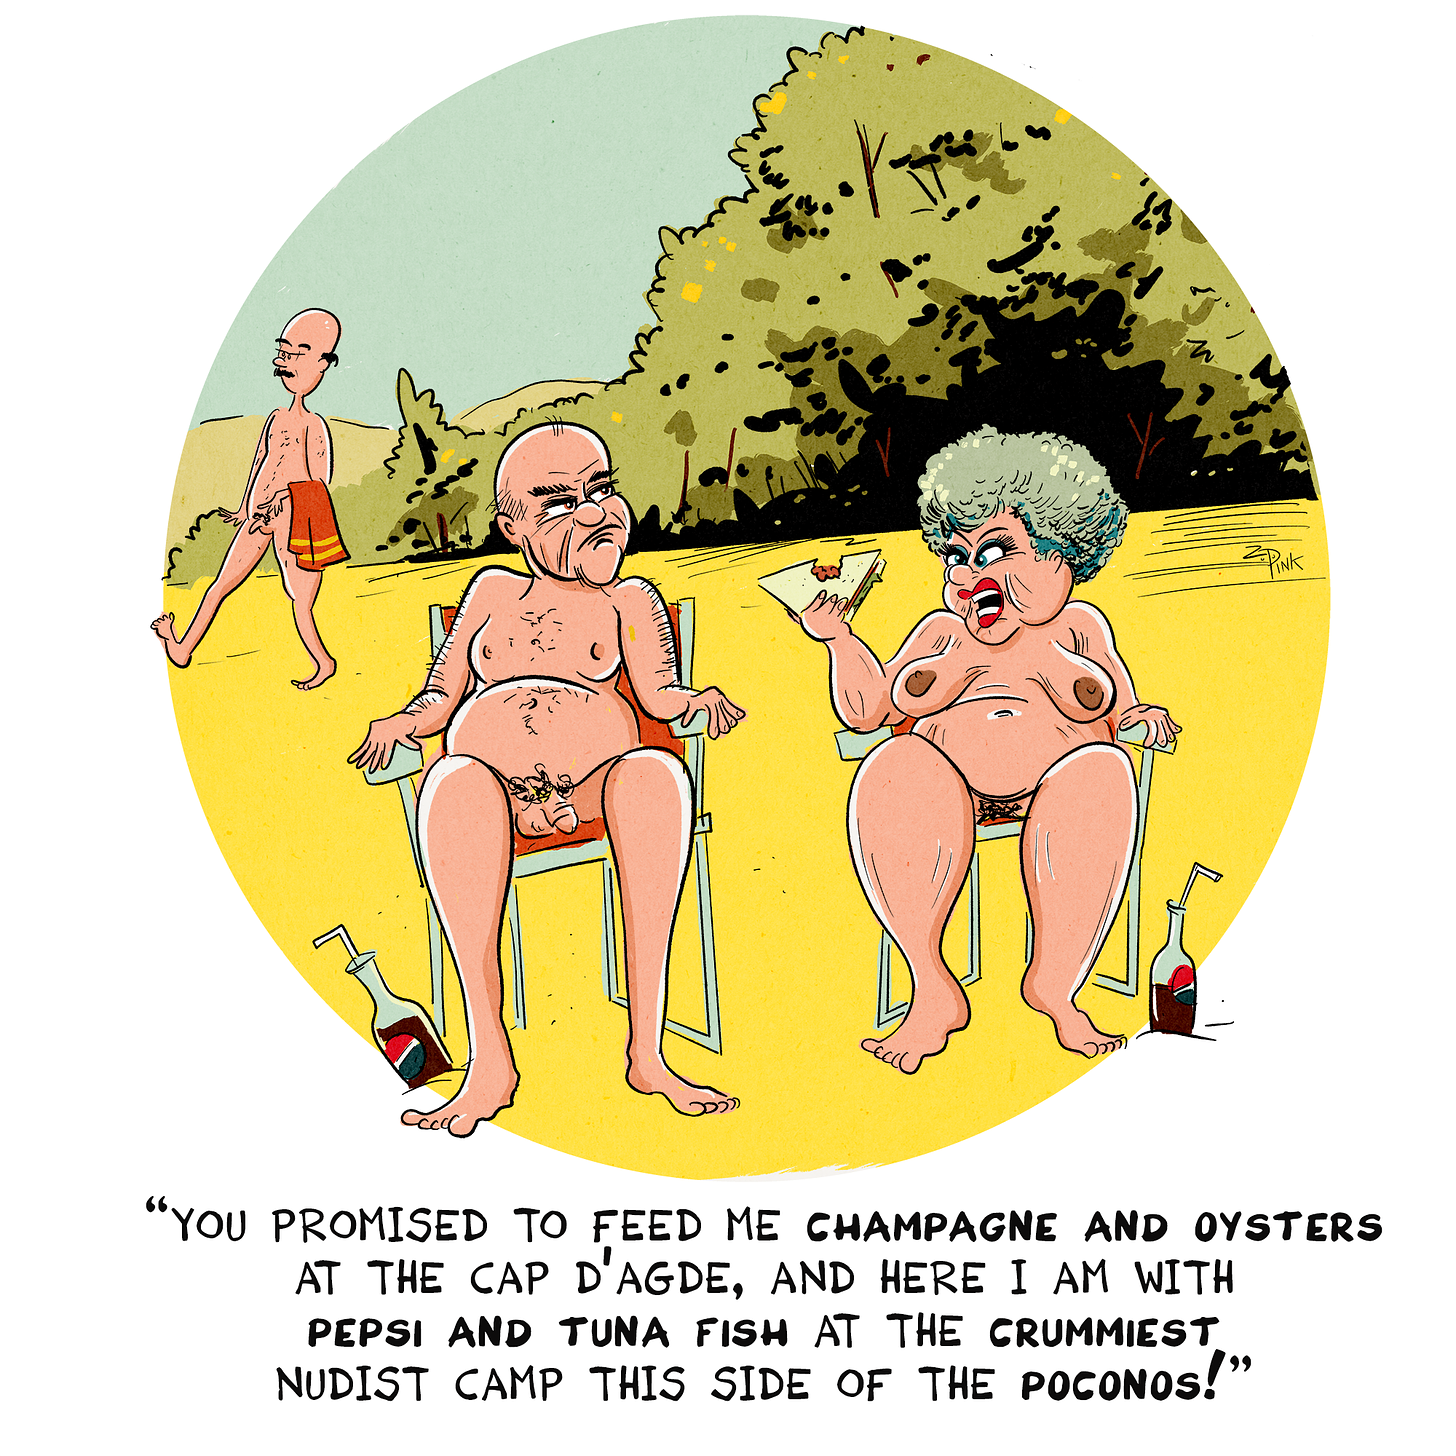 Nudie Cutie Comics: A nude elderly couple are sitting in lawn chairs in an uninspiring sandy environment, glaring at one another. A few trees are visible in the background.The woman is waving a half-eaten sandwich at the man and saying "“you promised to feed me champagne and oysters at the Cap D’Agde, and here i am with Pepsi and tuna fish at the crummiest nudist camp this side of the Poconos!”